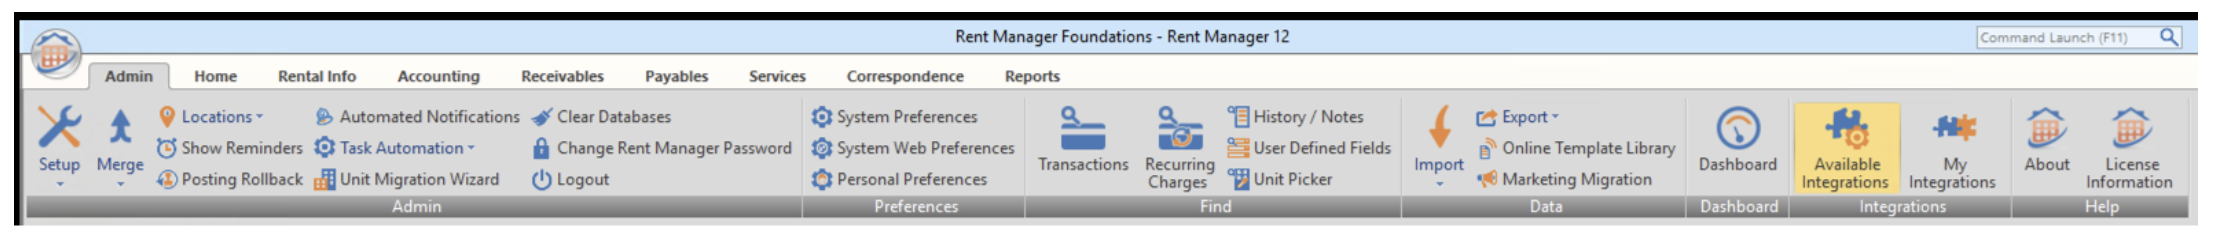 Integrating Rent Manager into Latchel